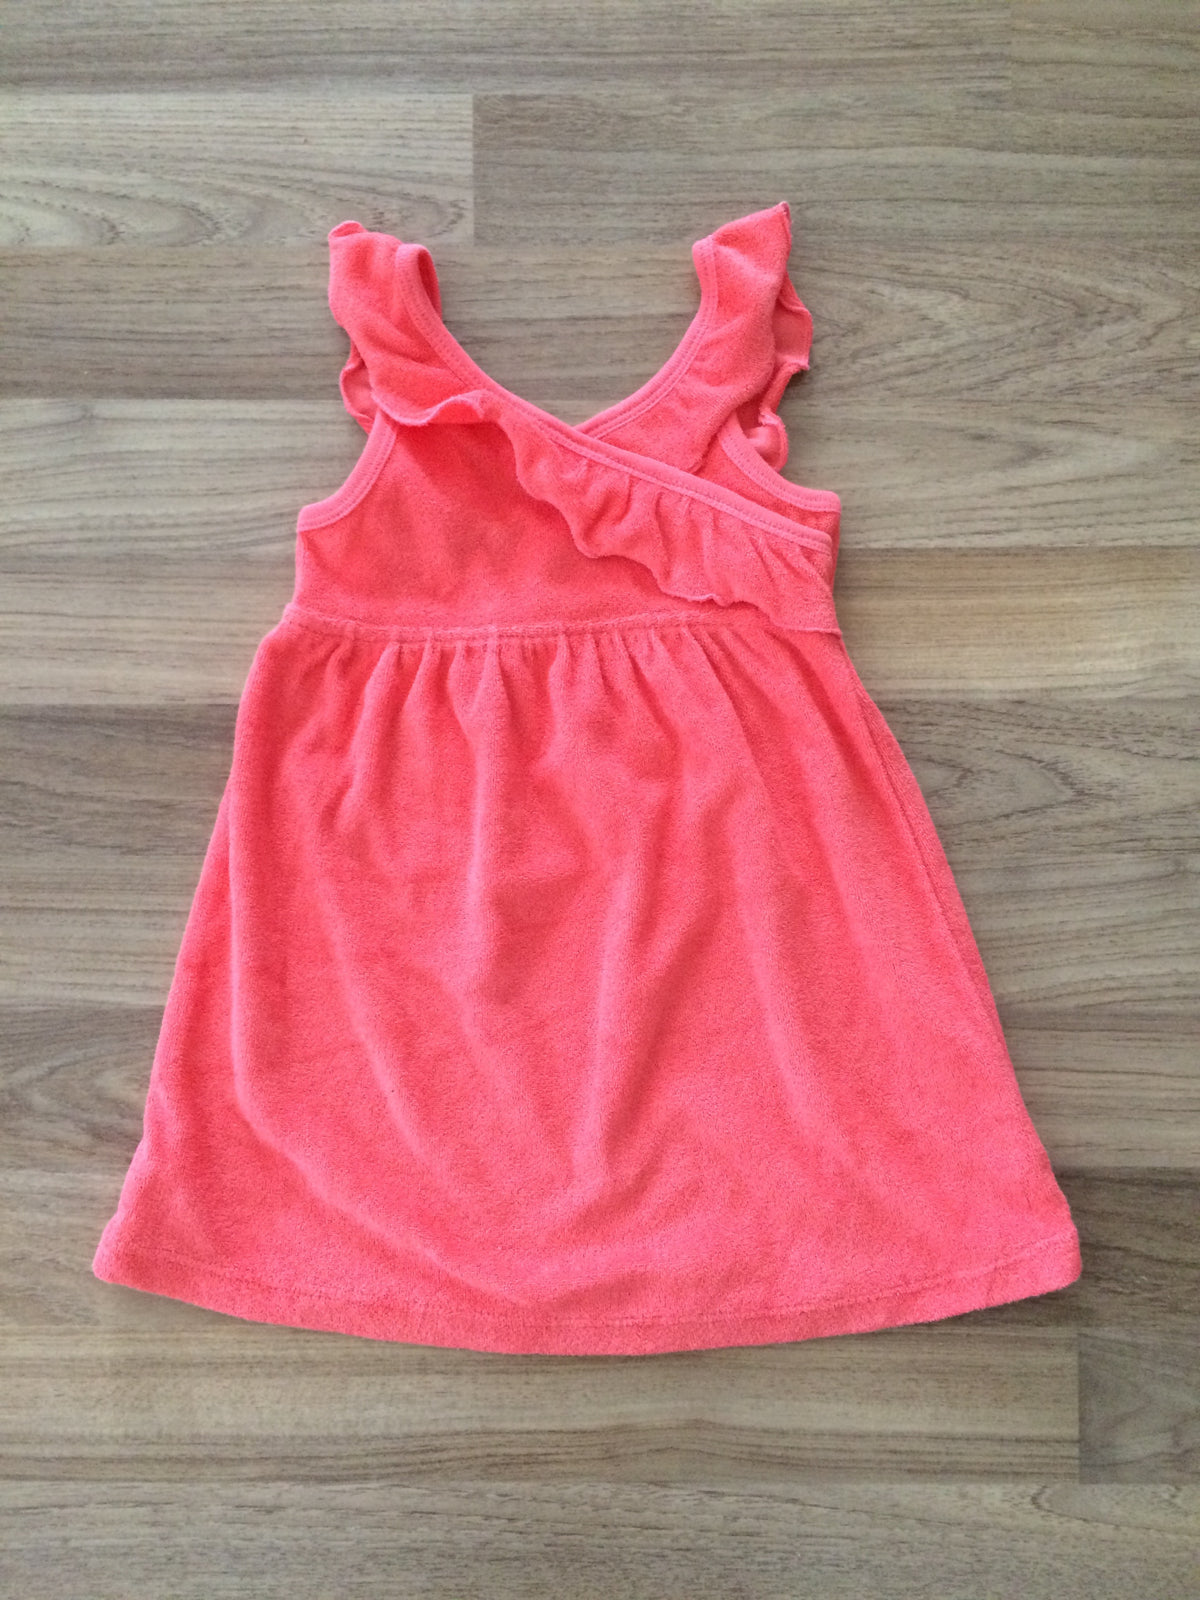 Swimsuit Cover-Up (Girls Size 12-18M)